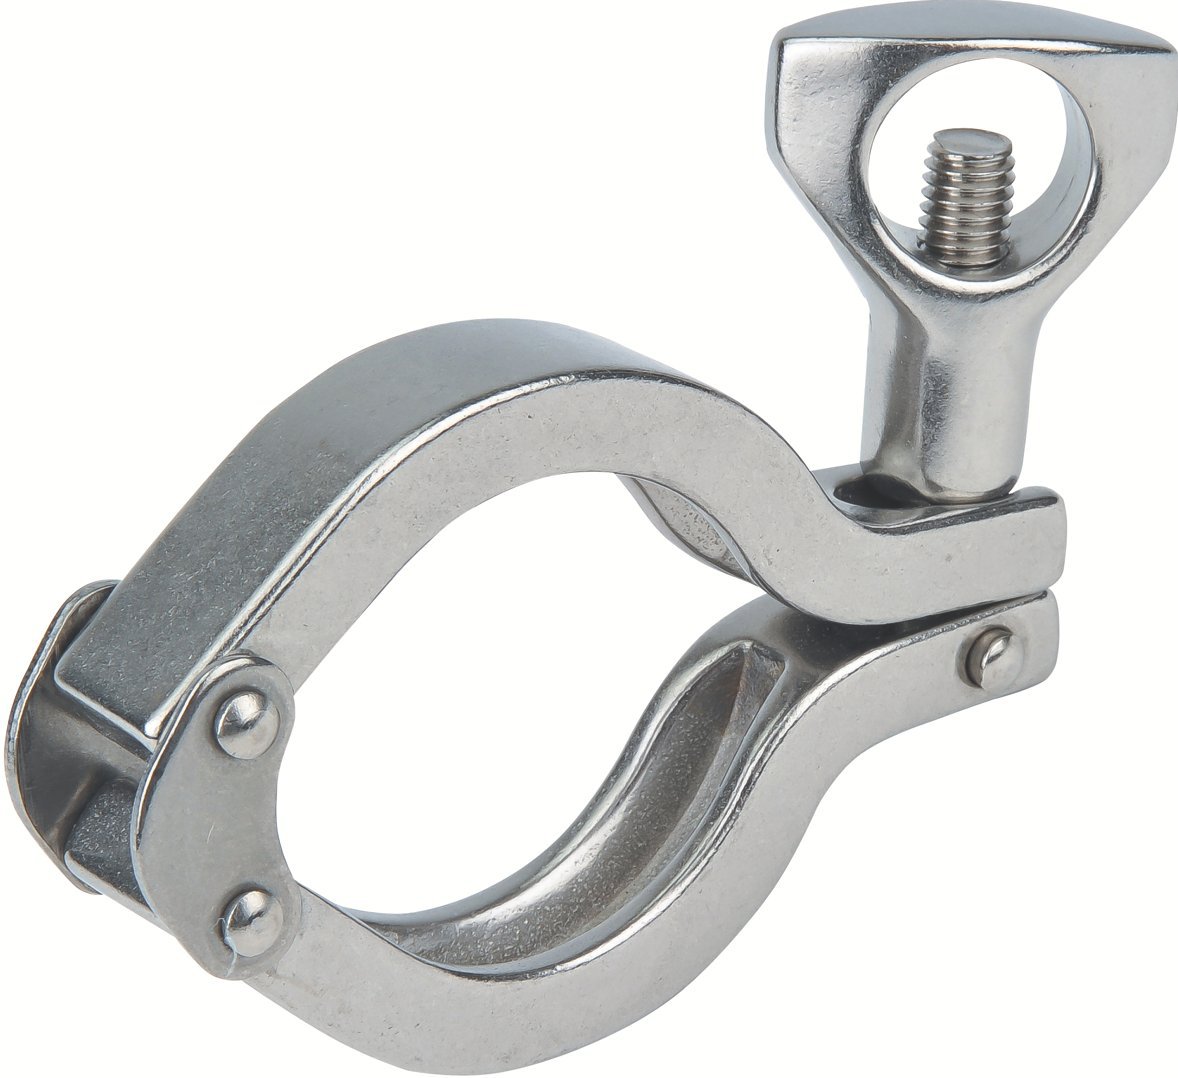 3142 - Collier clamp double agrafe - Inox 304.